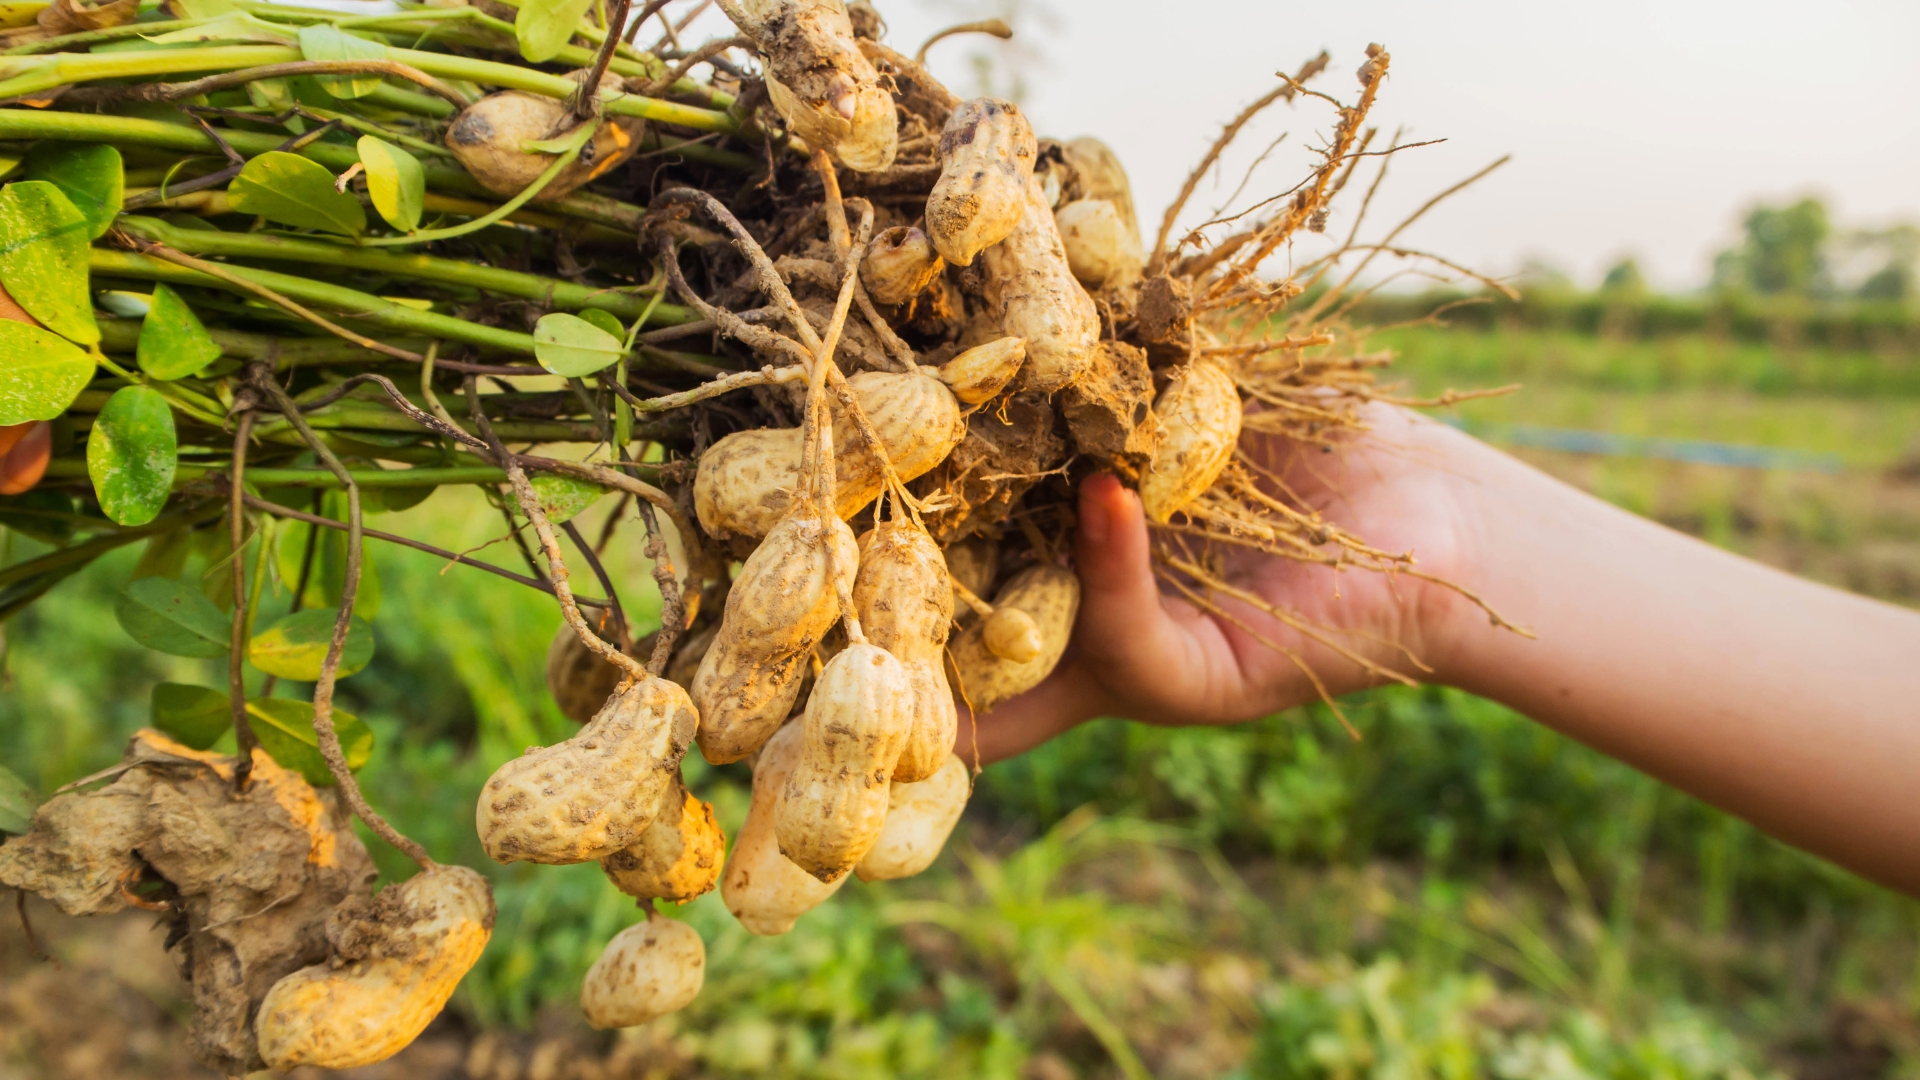 Get Ready To Be Blown Away By The Amazing Growth Cycle Of Peanuts That No One Told You About